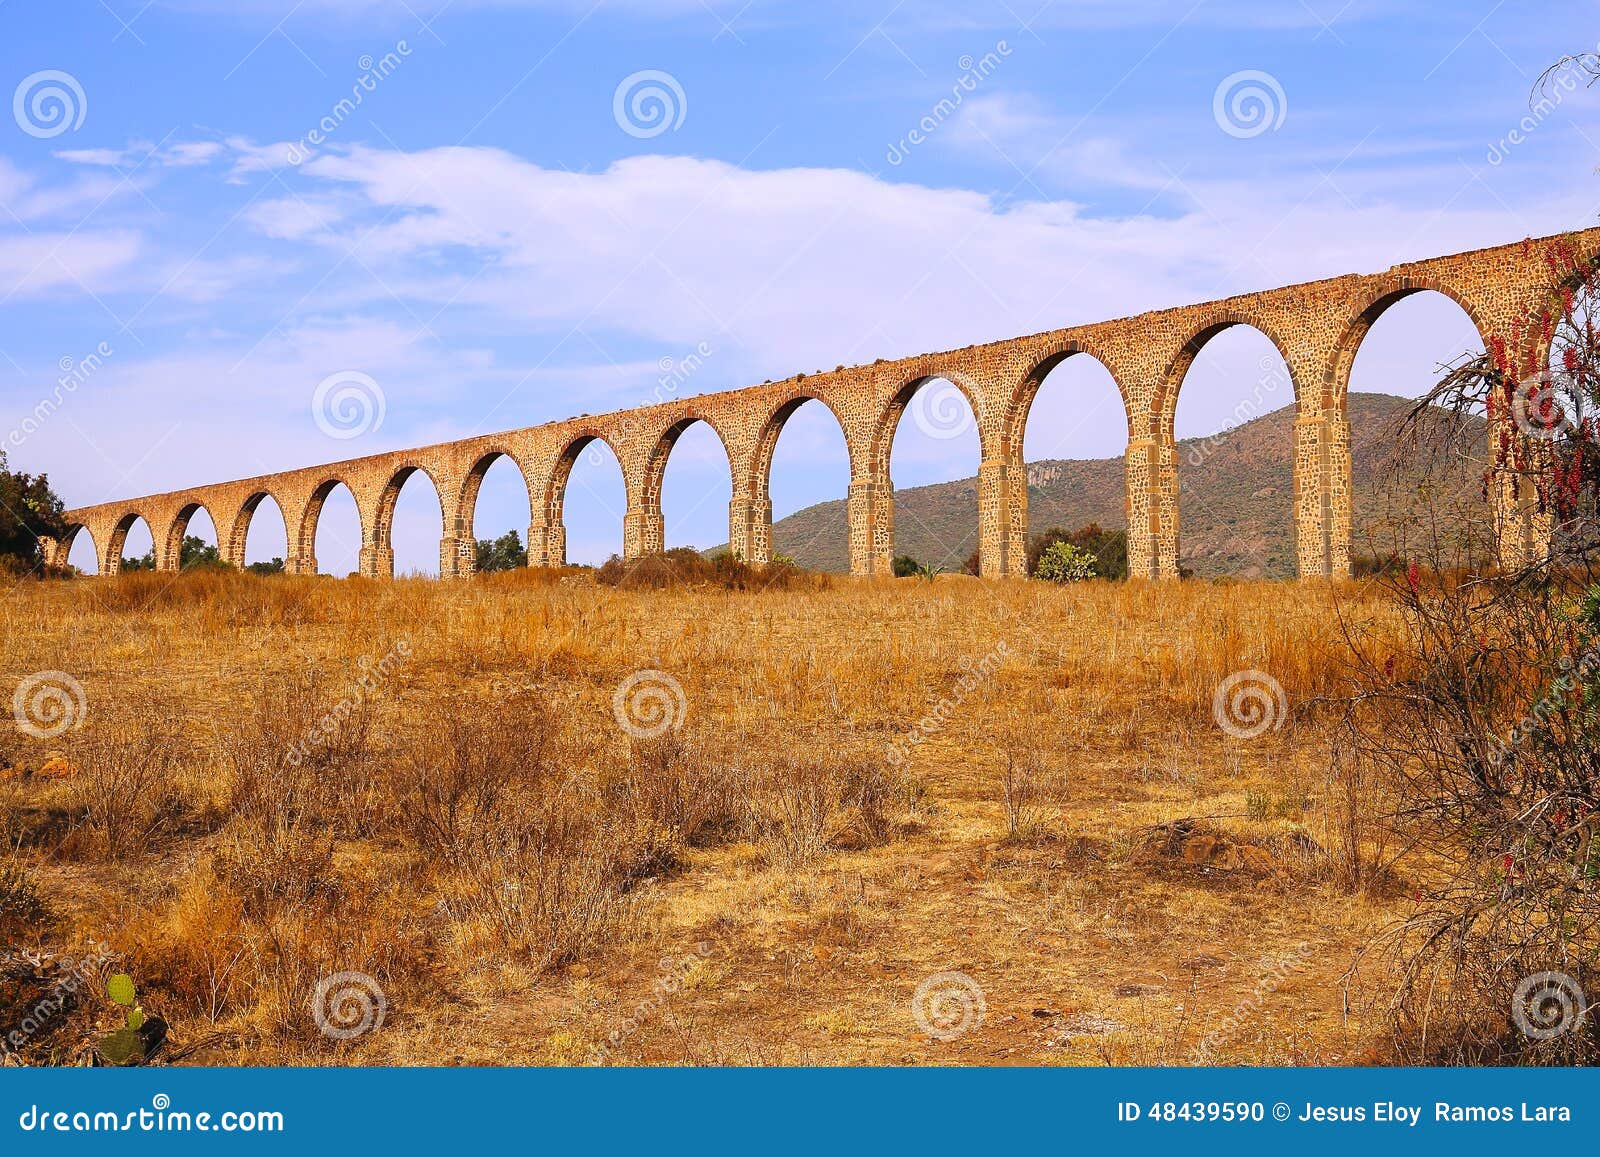 aqueduct of padre tembleque ii near teotihuacan, mexico